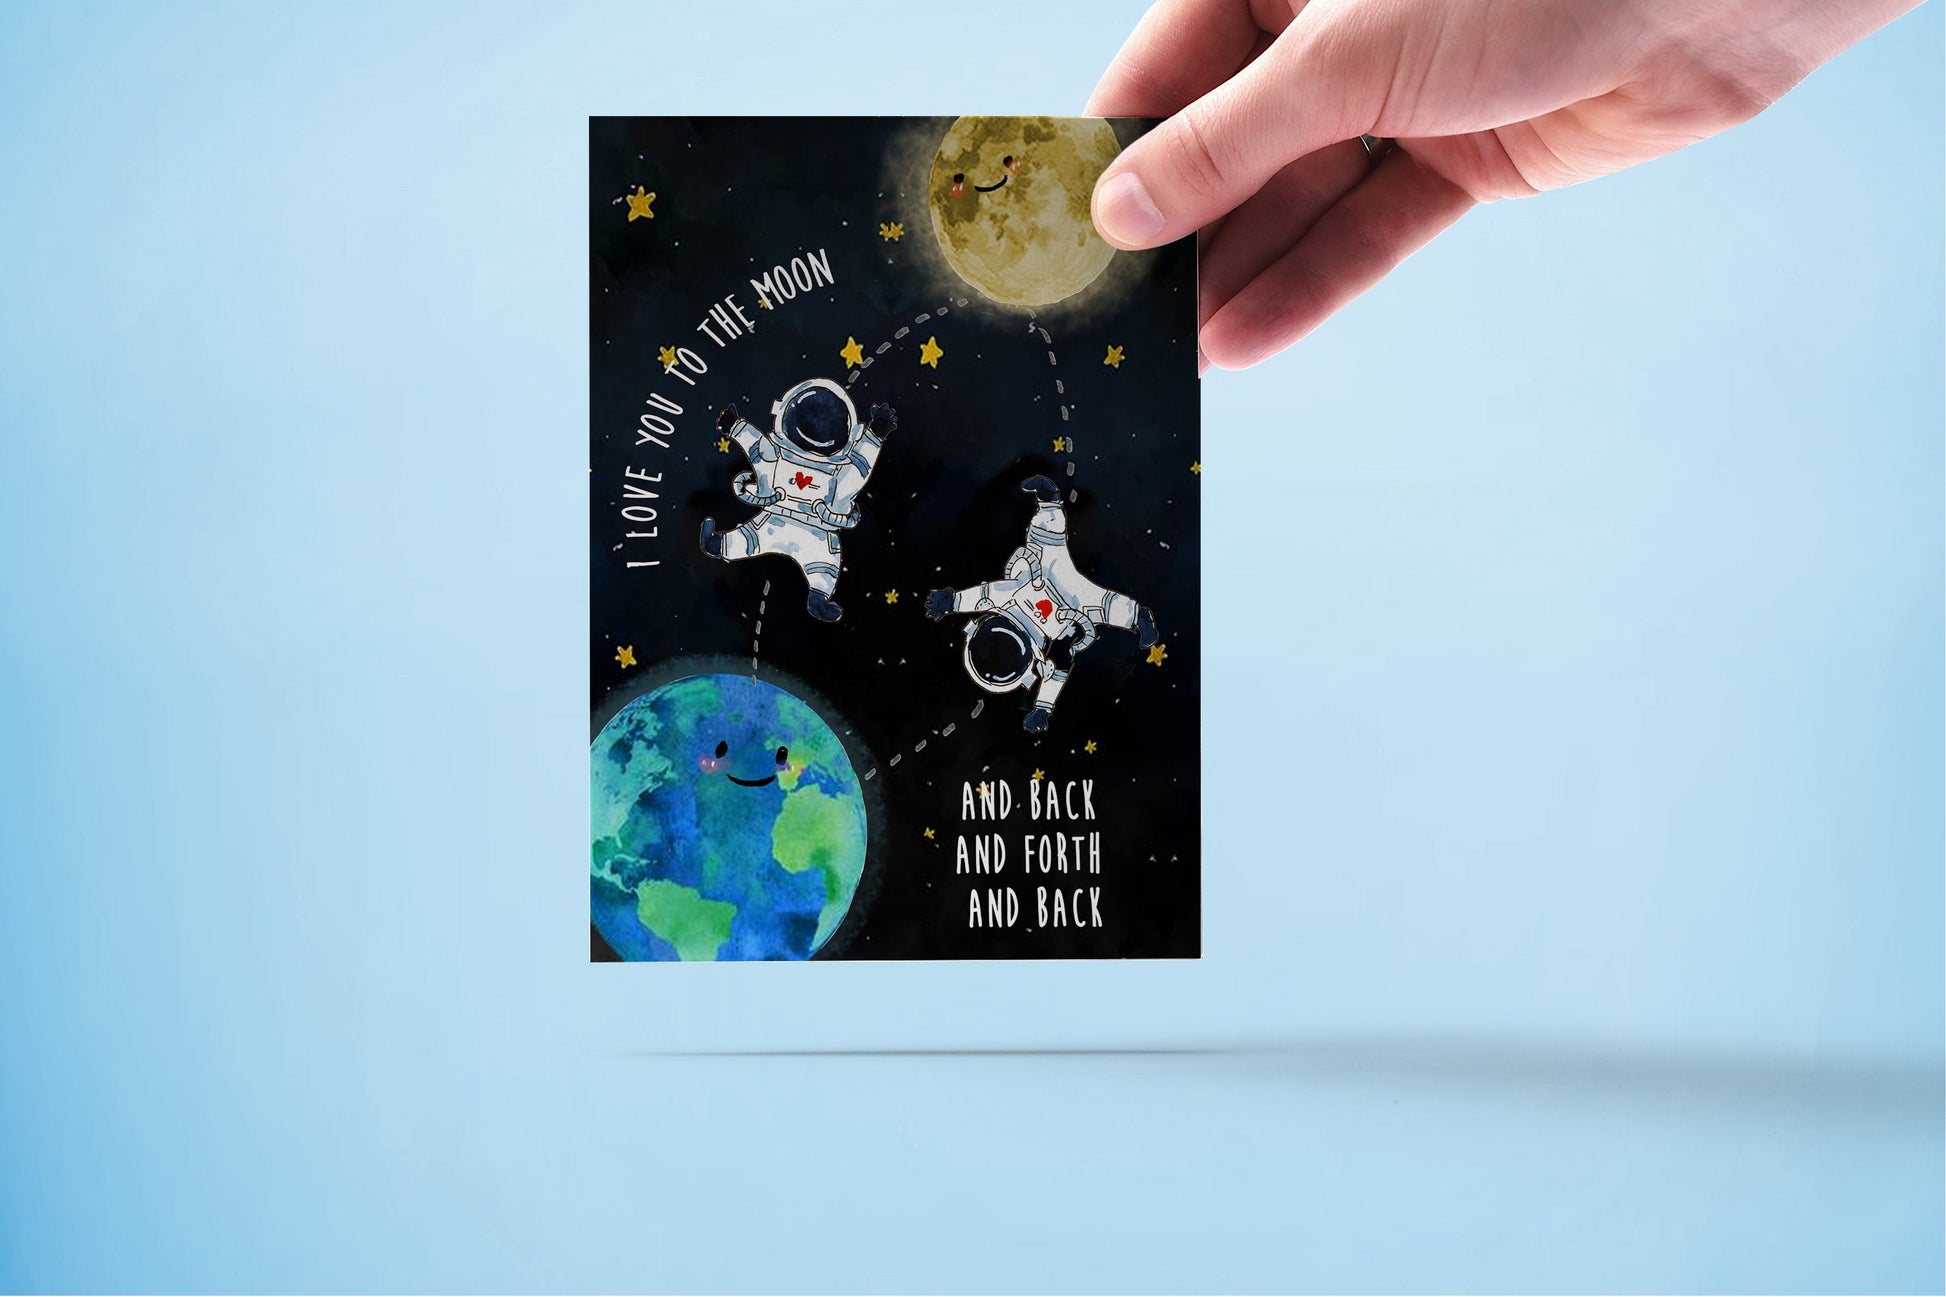 I Love You To The Moon And Back Funny Love Card For Husband, Kids Love Card Funny, Romantic Anniversary Card Astronaut Space Cards For Geek